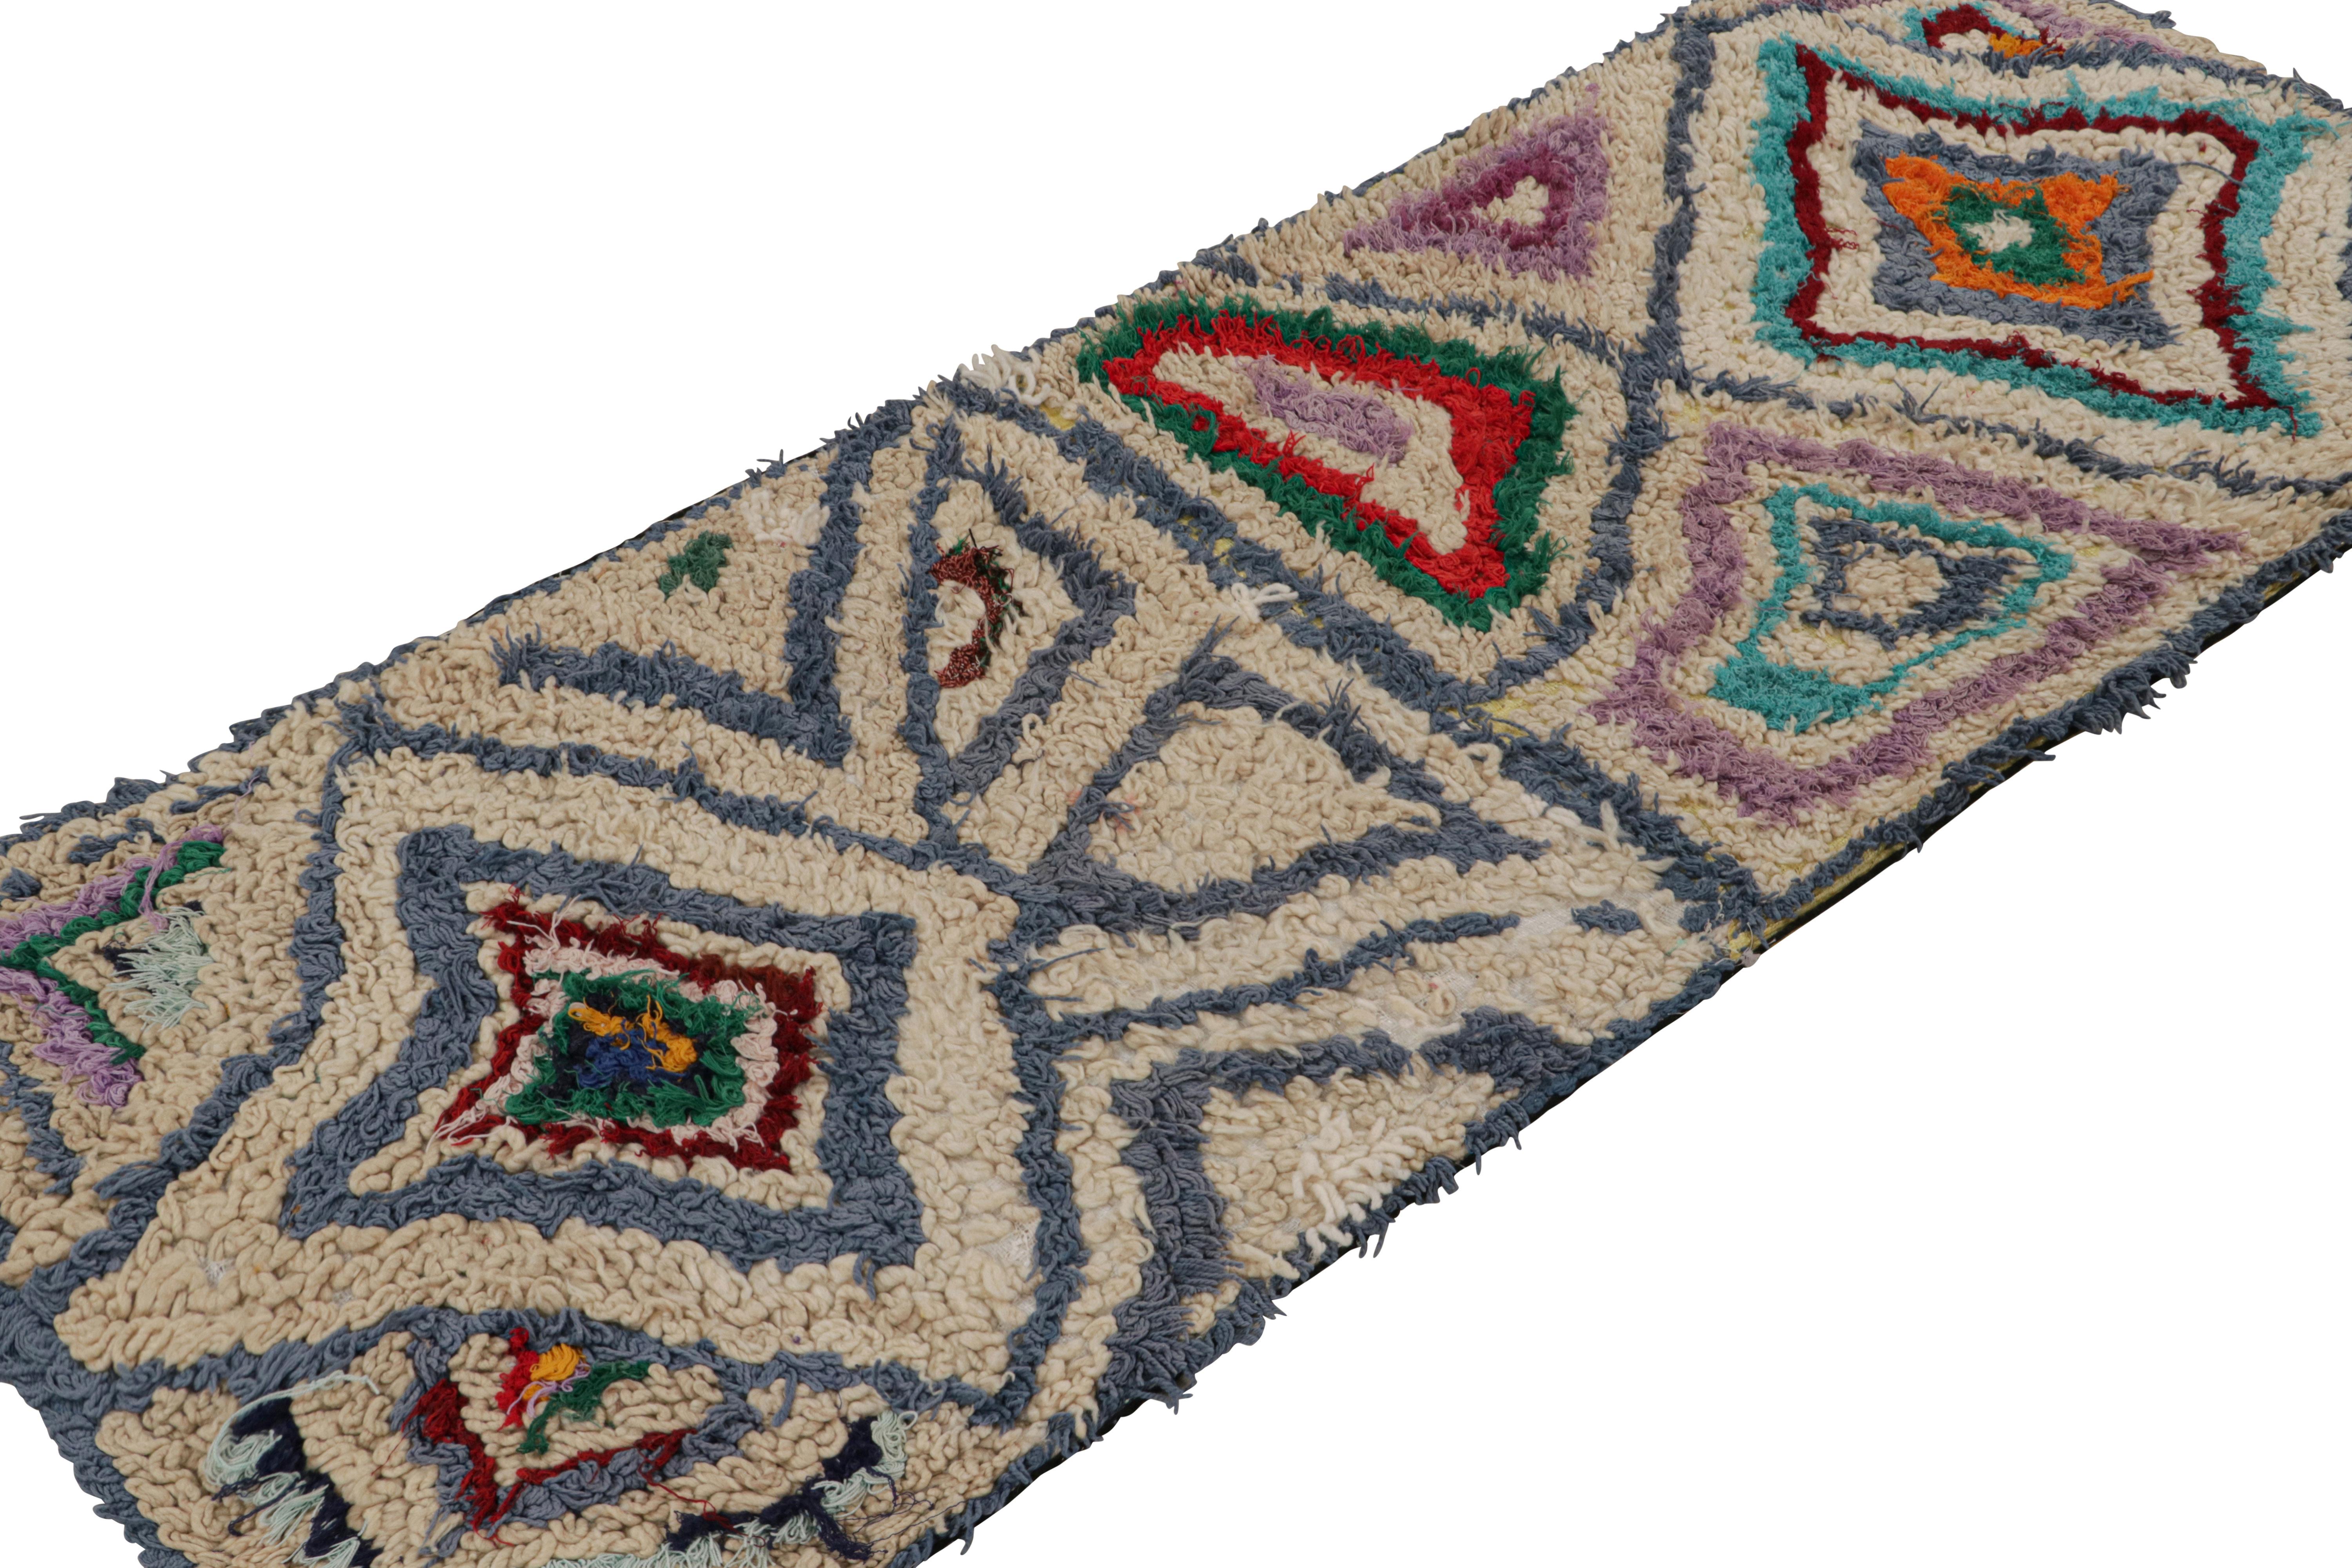 Hand-knotted in wool circa 1950-1960, this 3x7 vintage Moroccan runner rug with polychromatic diamond medallions, hails from the Azilal tribe.  

On the Design: 

This is an exemplary piece of the playful, bright nature and textural beauty that